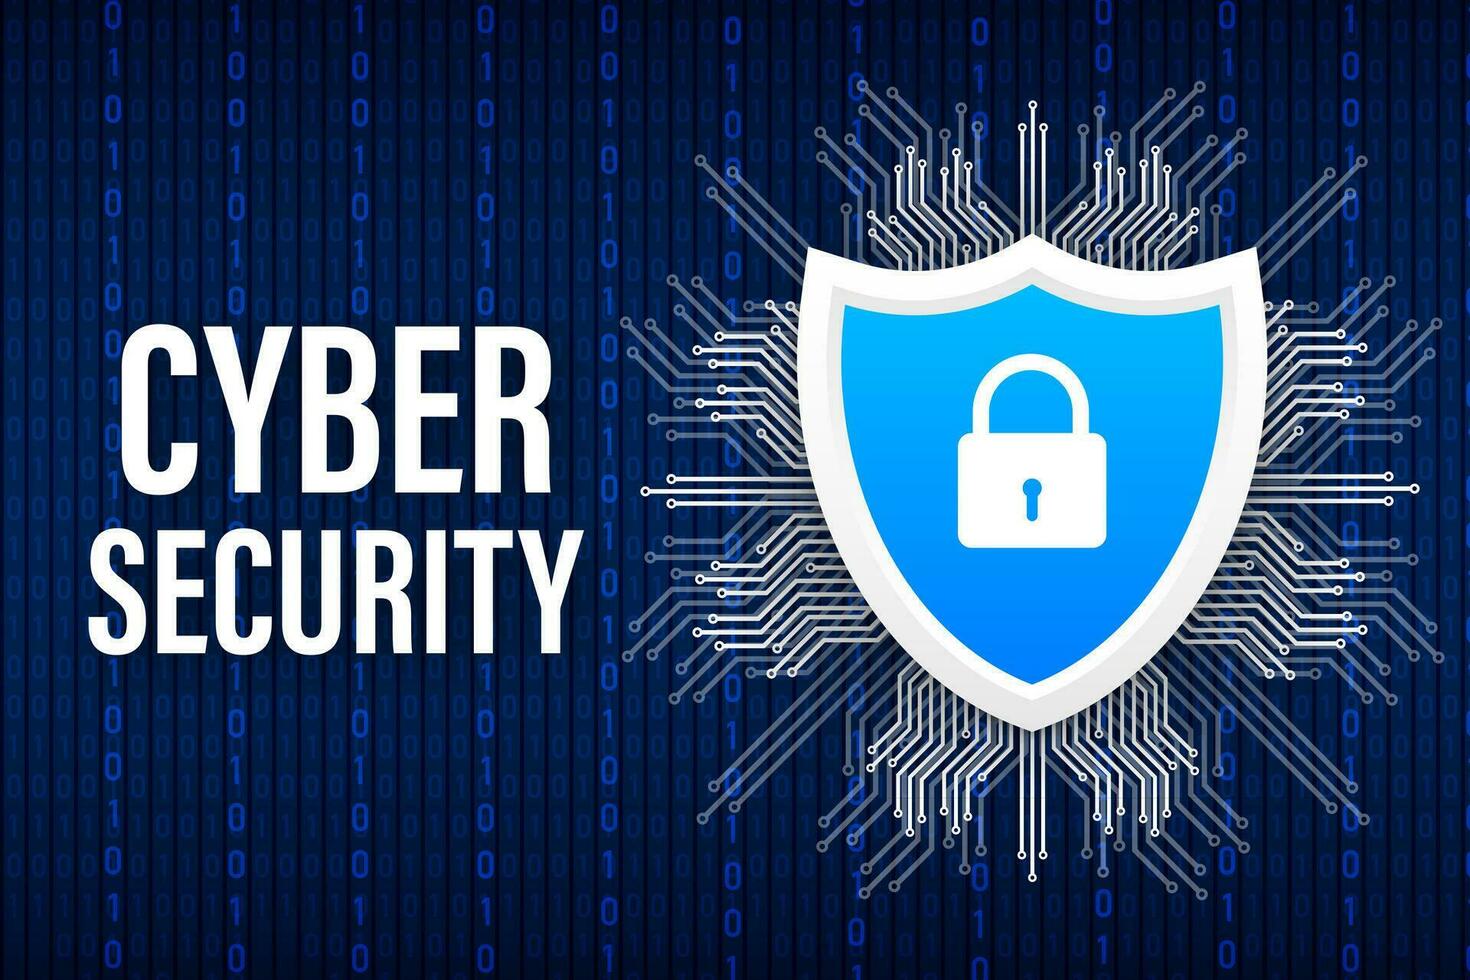 Cyber security vector logo with shield and check mark. Security shield concept. Internet security. Vector illustration